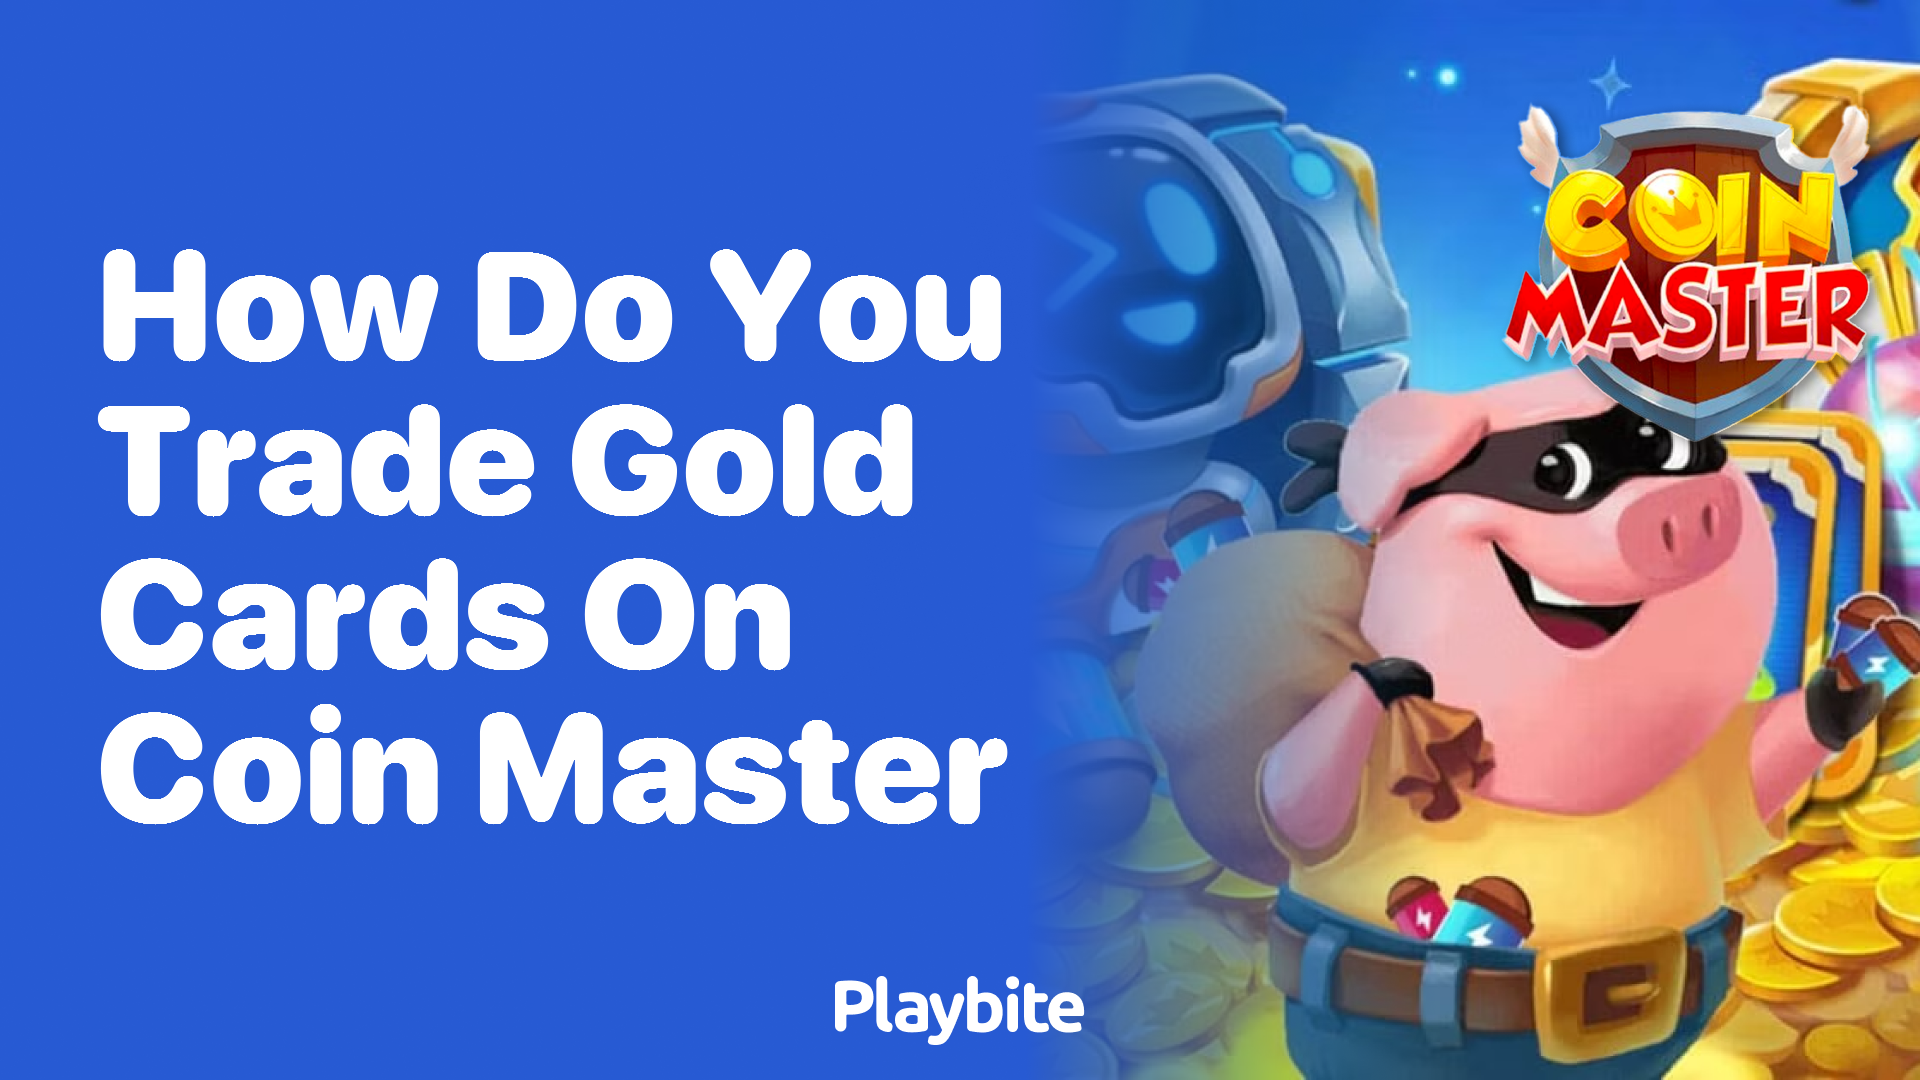 How to send Gold Cards in Coin Master — explained